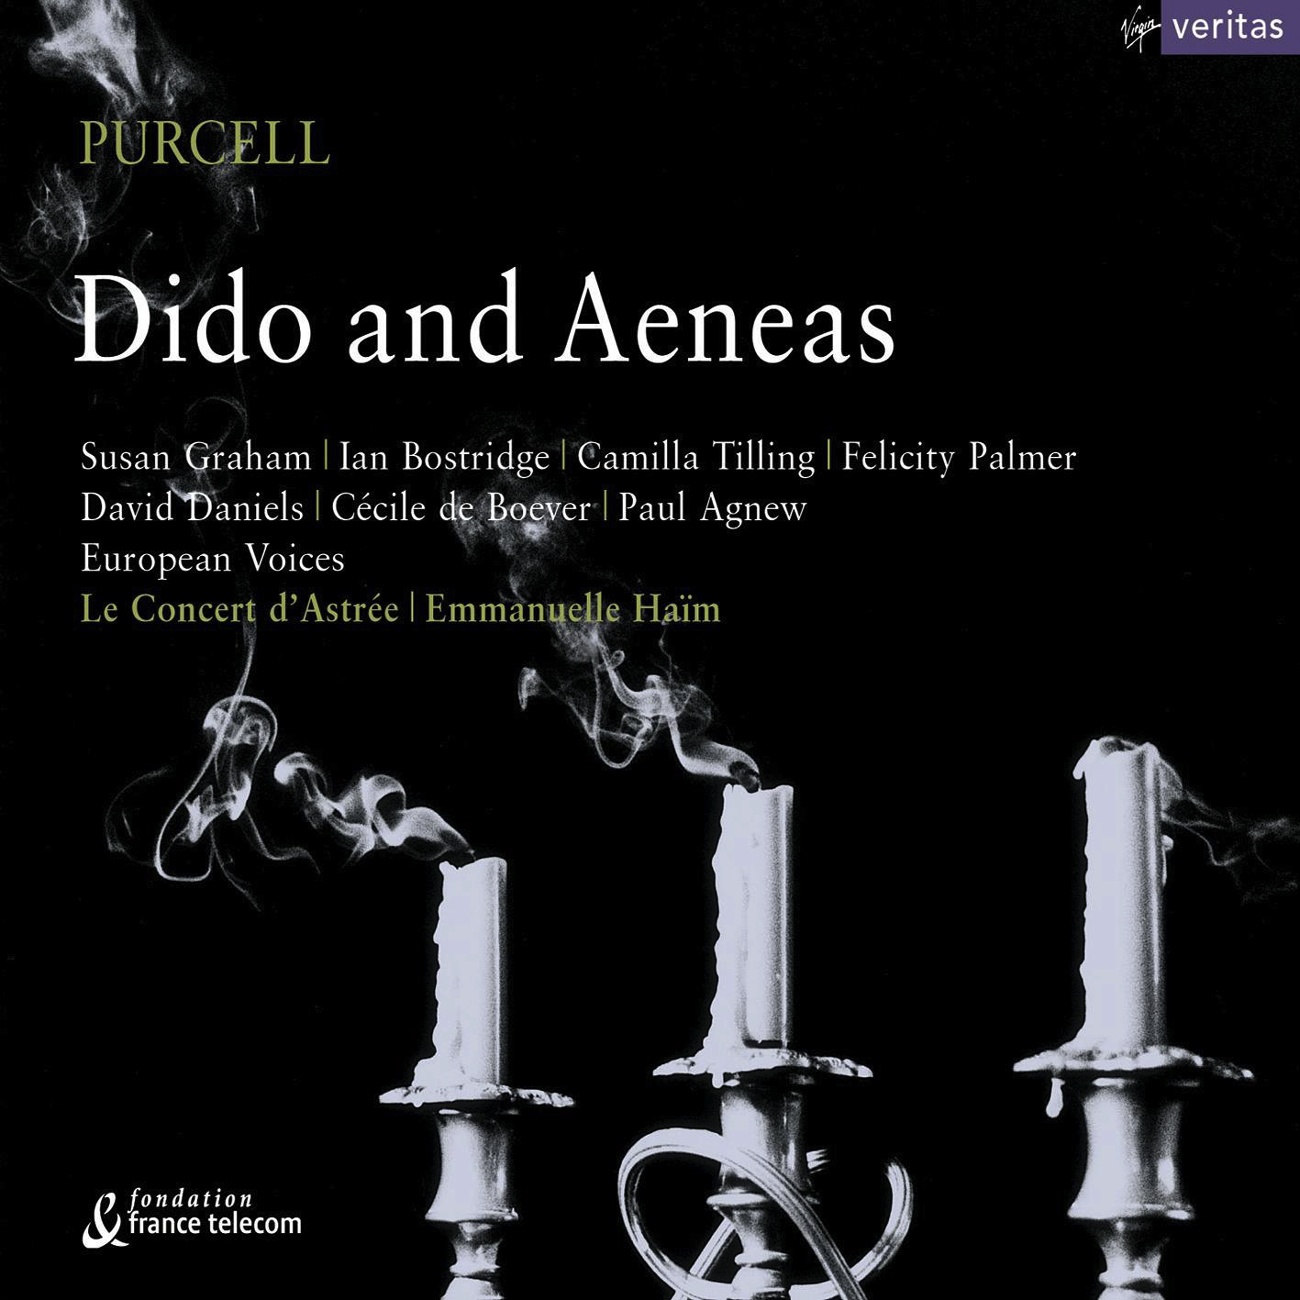 Dido and Aeneas, ACT 1: Scene: The Palast: When Monarchs unite how happy their state (Chorus)